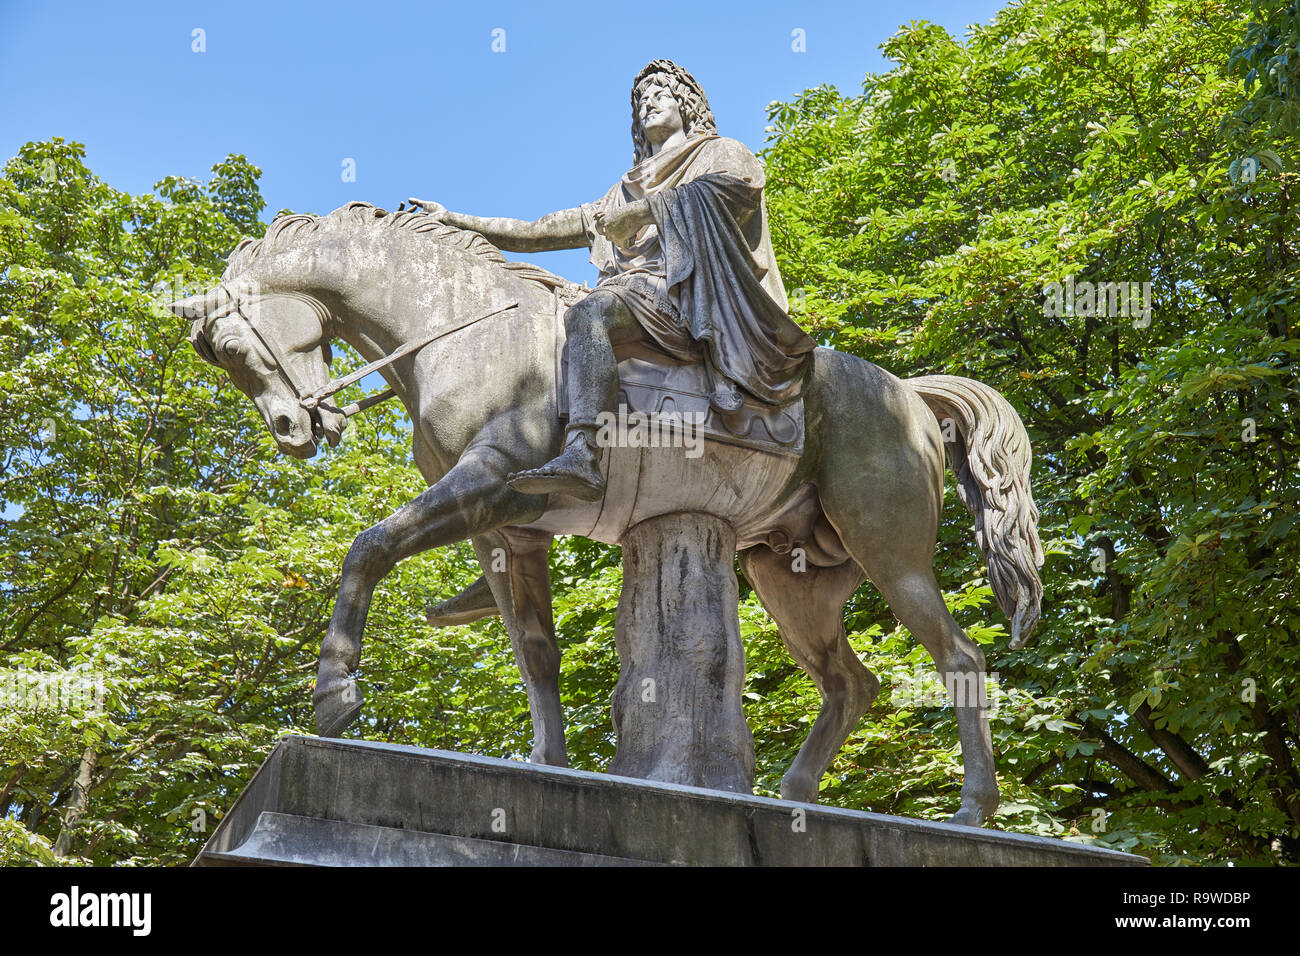 Equestrian statue of Louis XIII by Jean-Pierre Cortot (1787-1843) in a sunny summer day in Paris, France Stock Photo